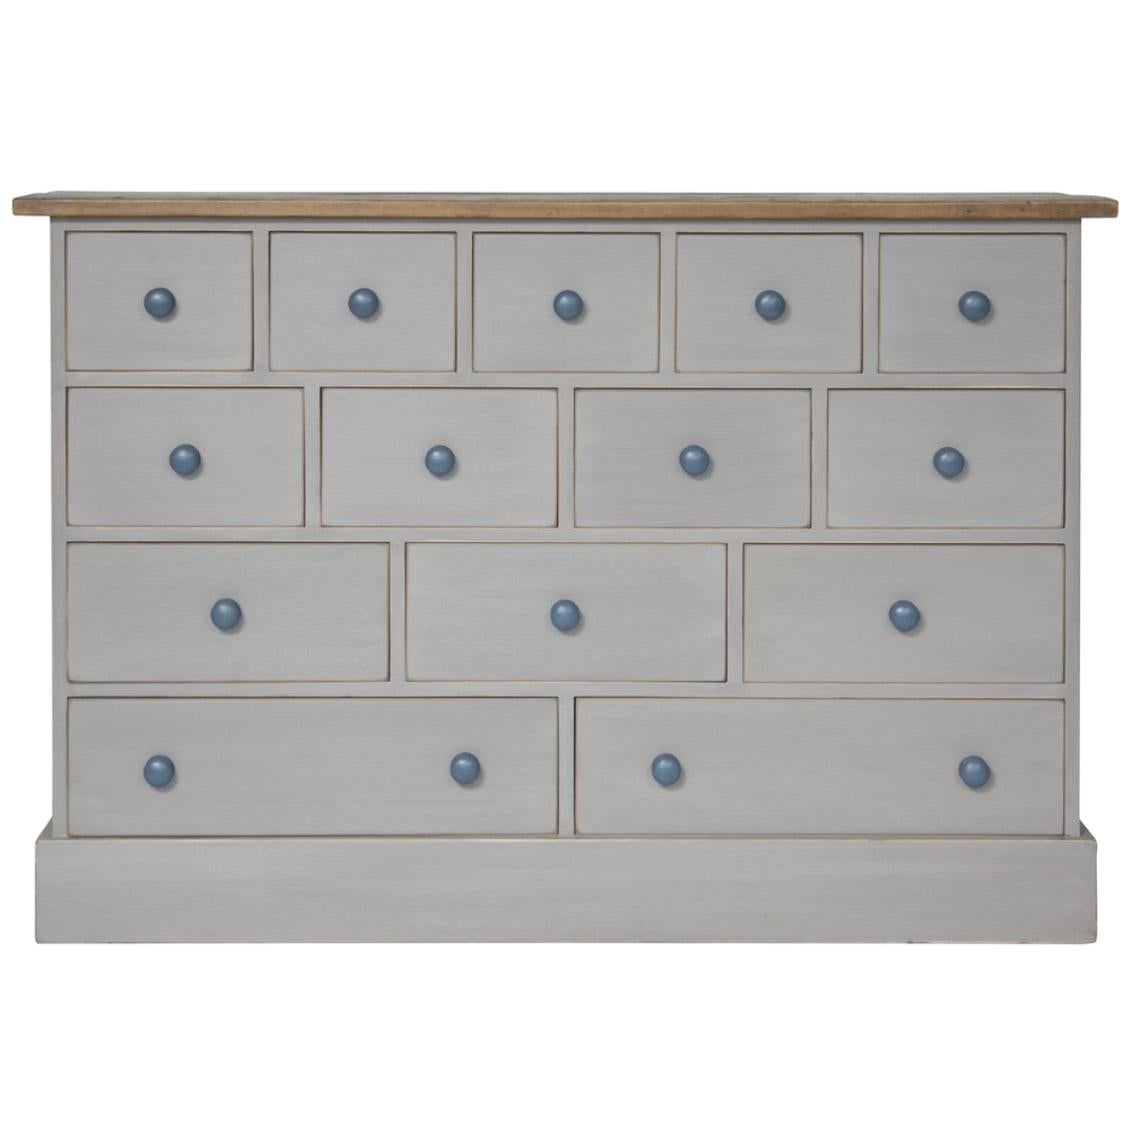 The No.14 Vintage Style Painted Bank of Shop Drawers For Sale